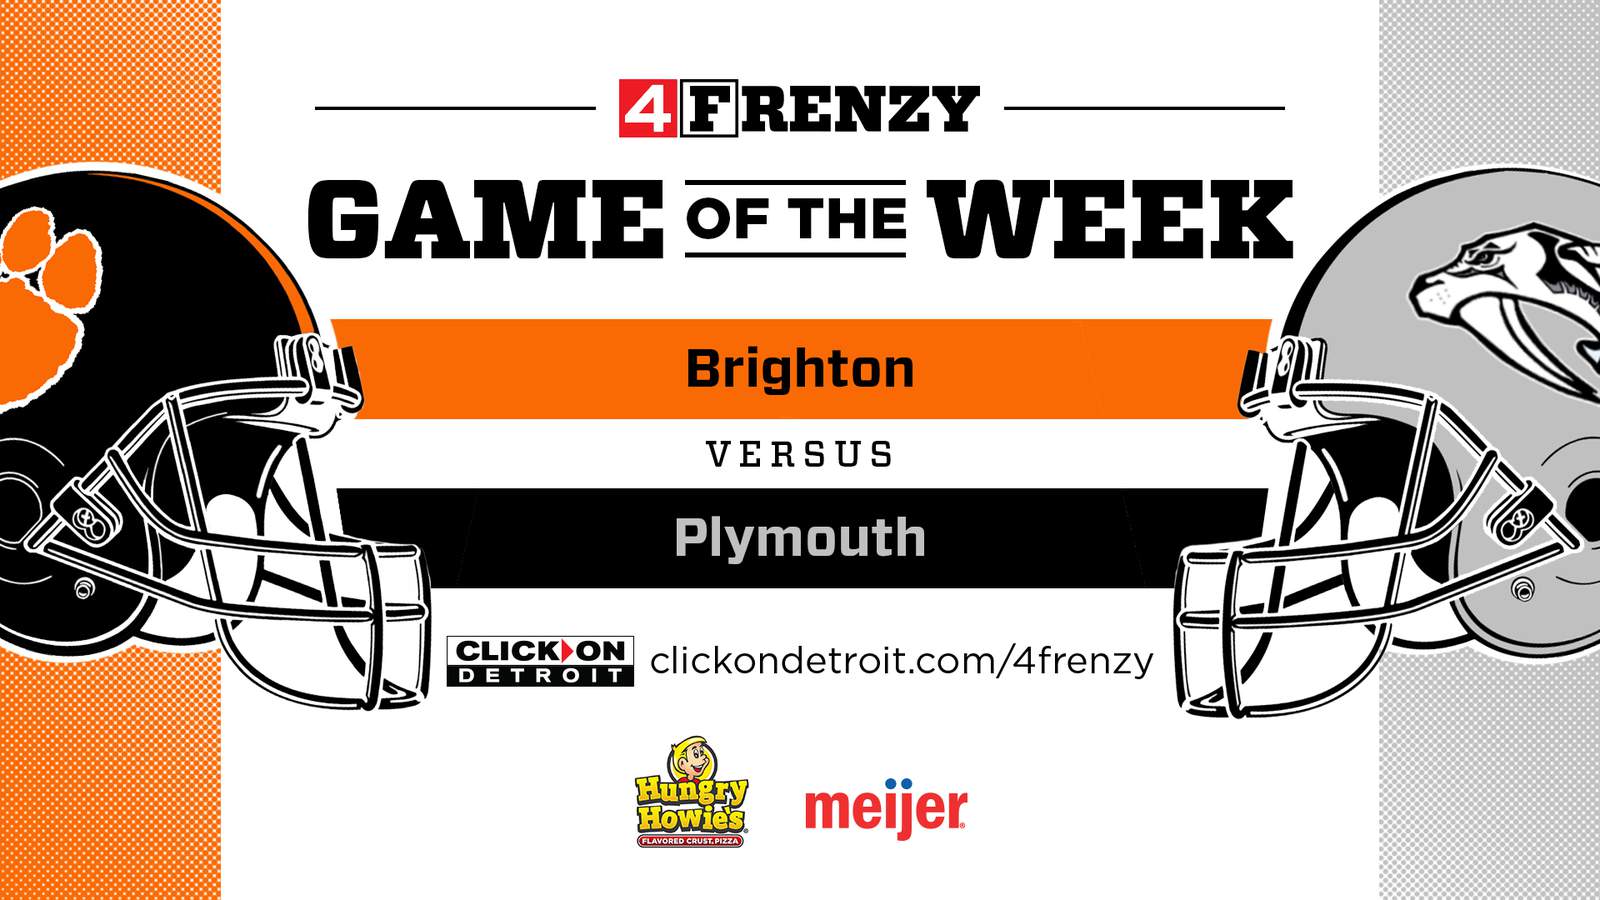 4Frenzy ‘Game of the Week’: The teams and the rivalry